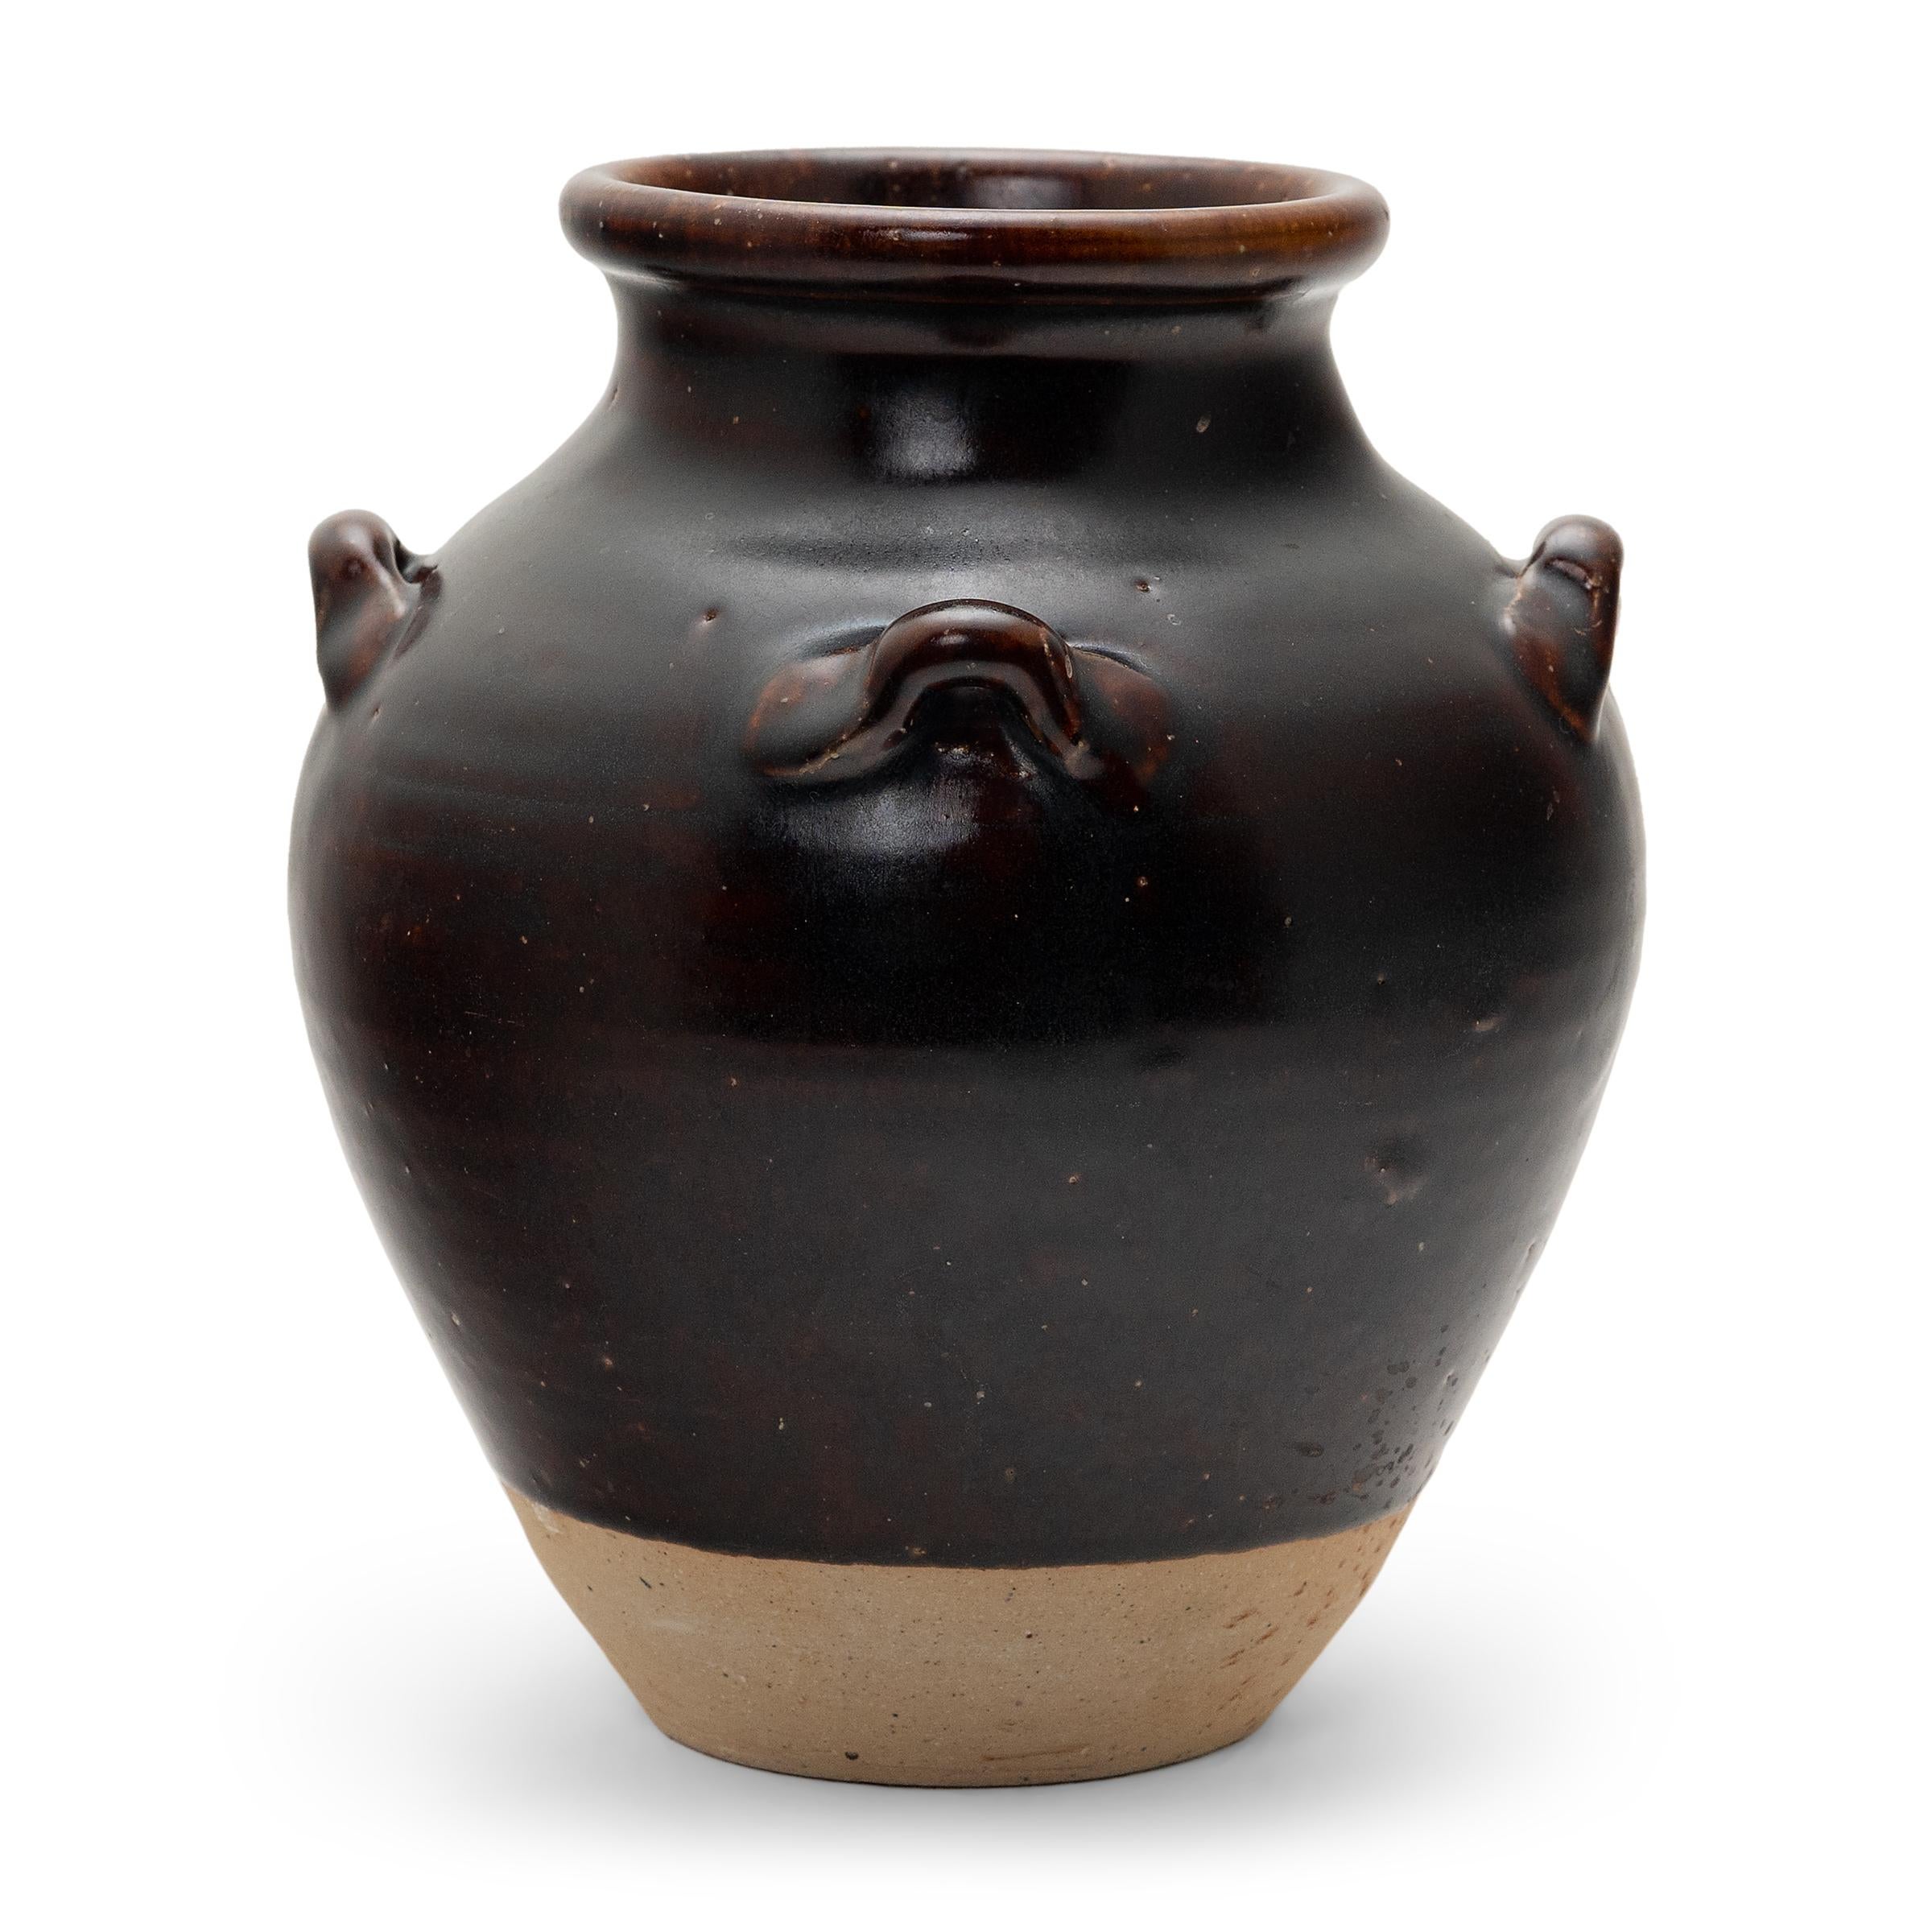 With a balanced profile and a lustrous, speckled glaze, this petite Chinese kitchen vessel is a charming example of handcrafted pottery. As evidenced by its interior glaze, the small jar was originally used for storing liquids such as rice wine,